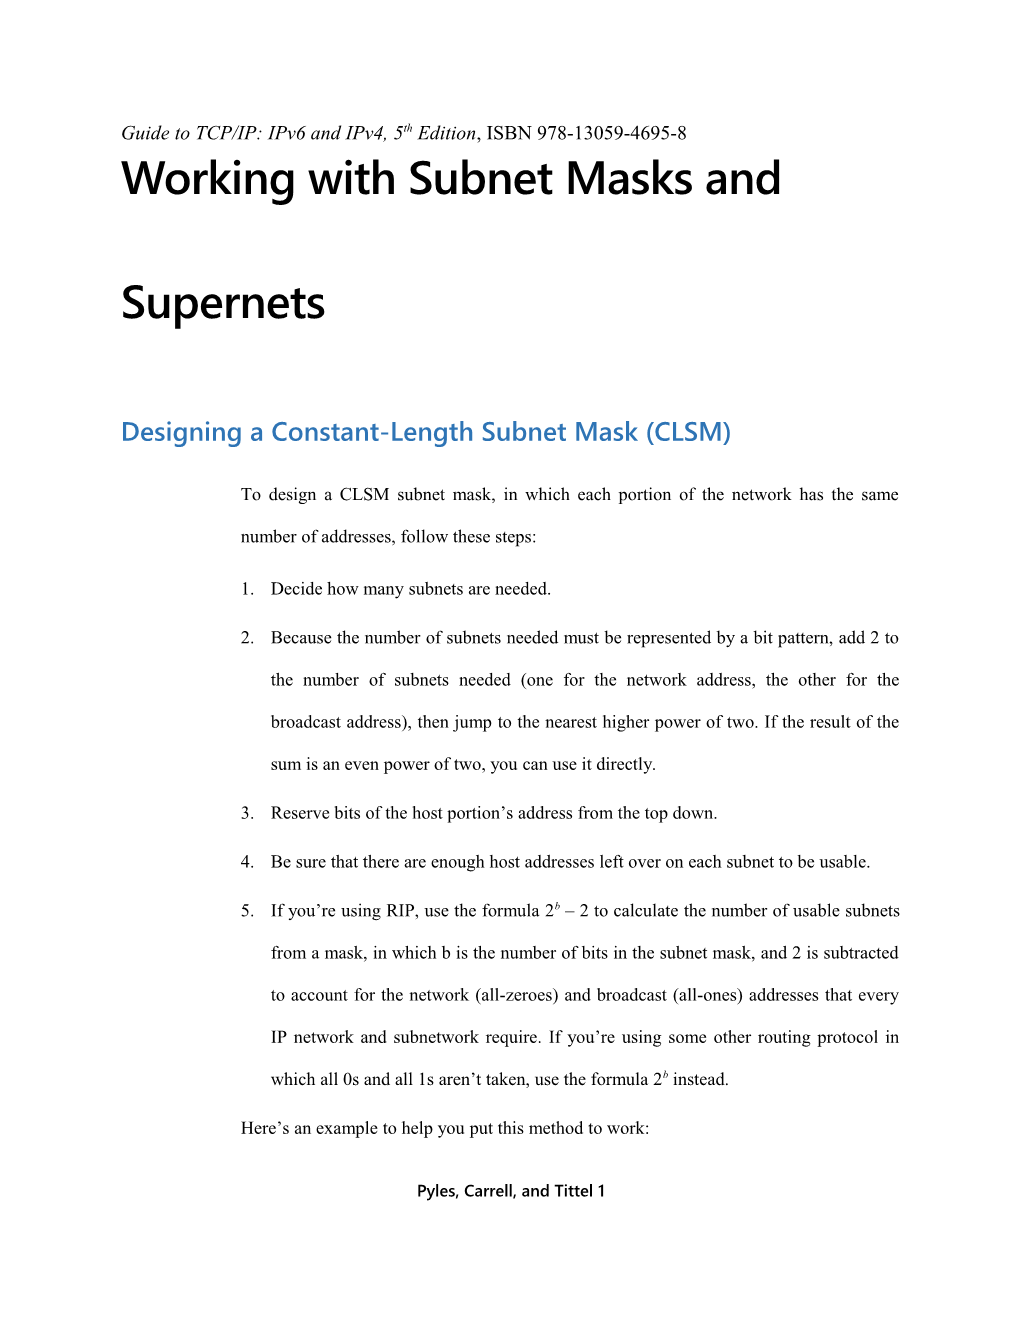 Designing a Constant-Length Subnet Mask (CLSM)